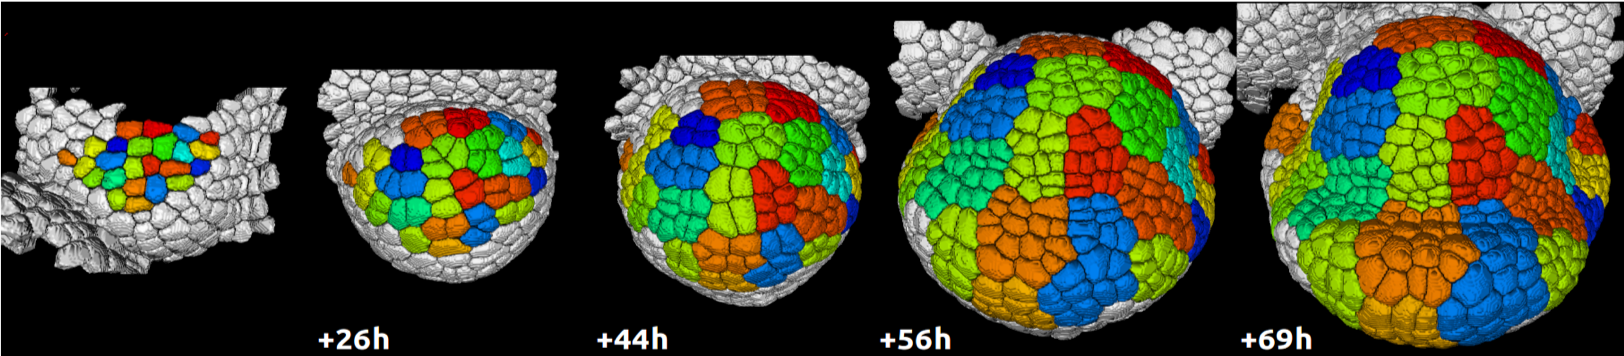 Sequence of segmented images including cell lineages (cell colors) of a young growing flower primordium.